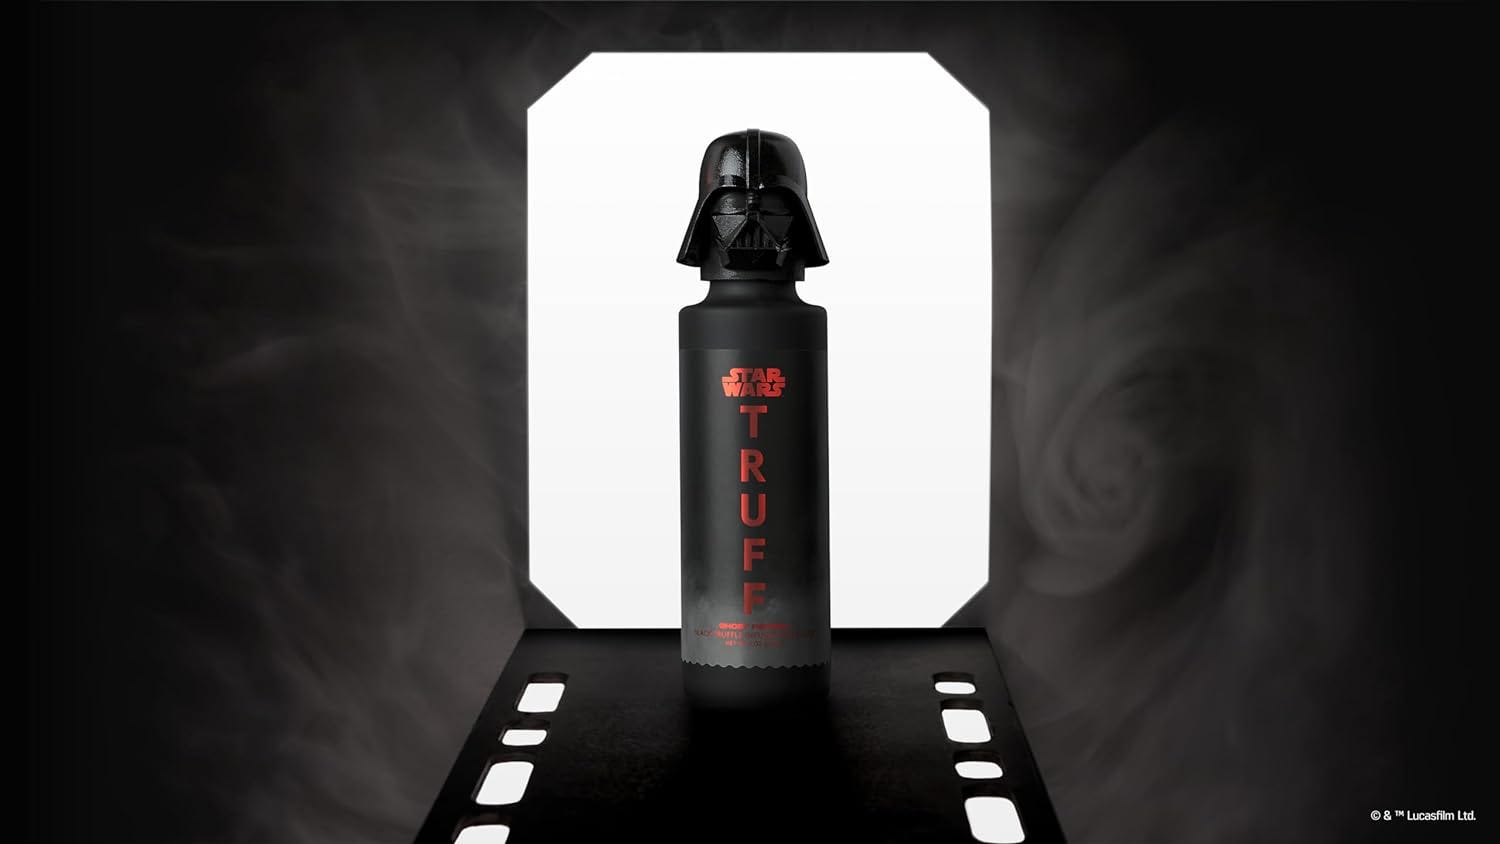 'Star Wars' Fans, Truff's Latest Super-Spicy Hot Sauce Is for You